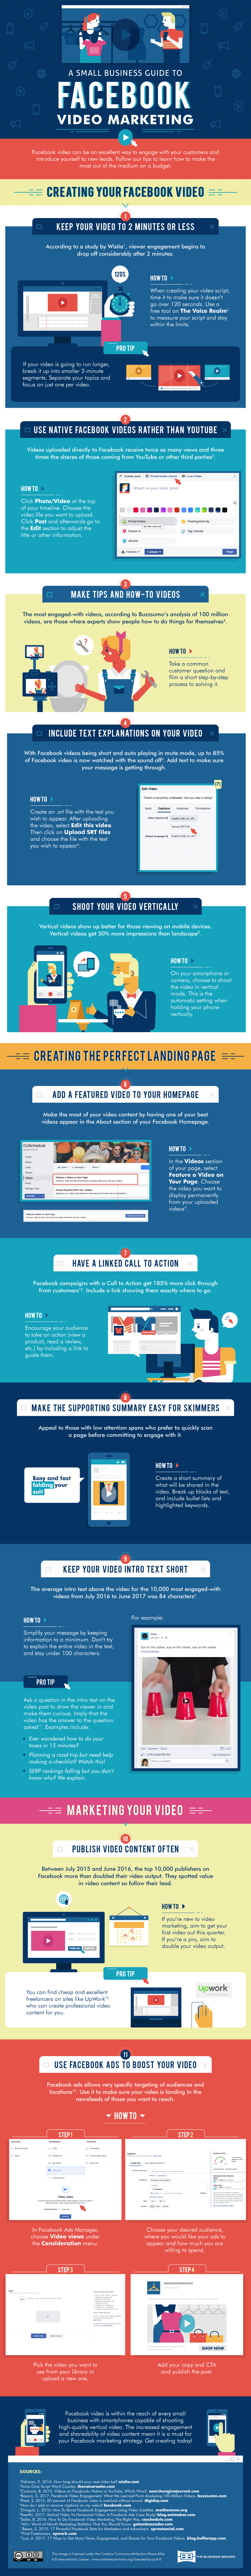 Social Media Marketing: 11 Tips to Boost Your Small Business with Facebook Video - #infographic